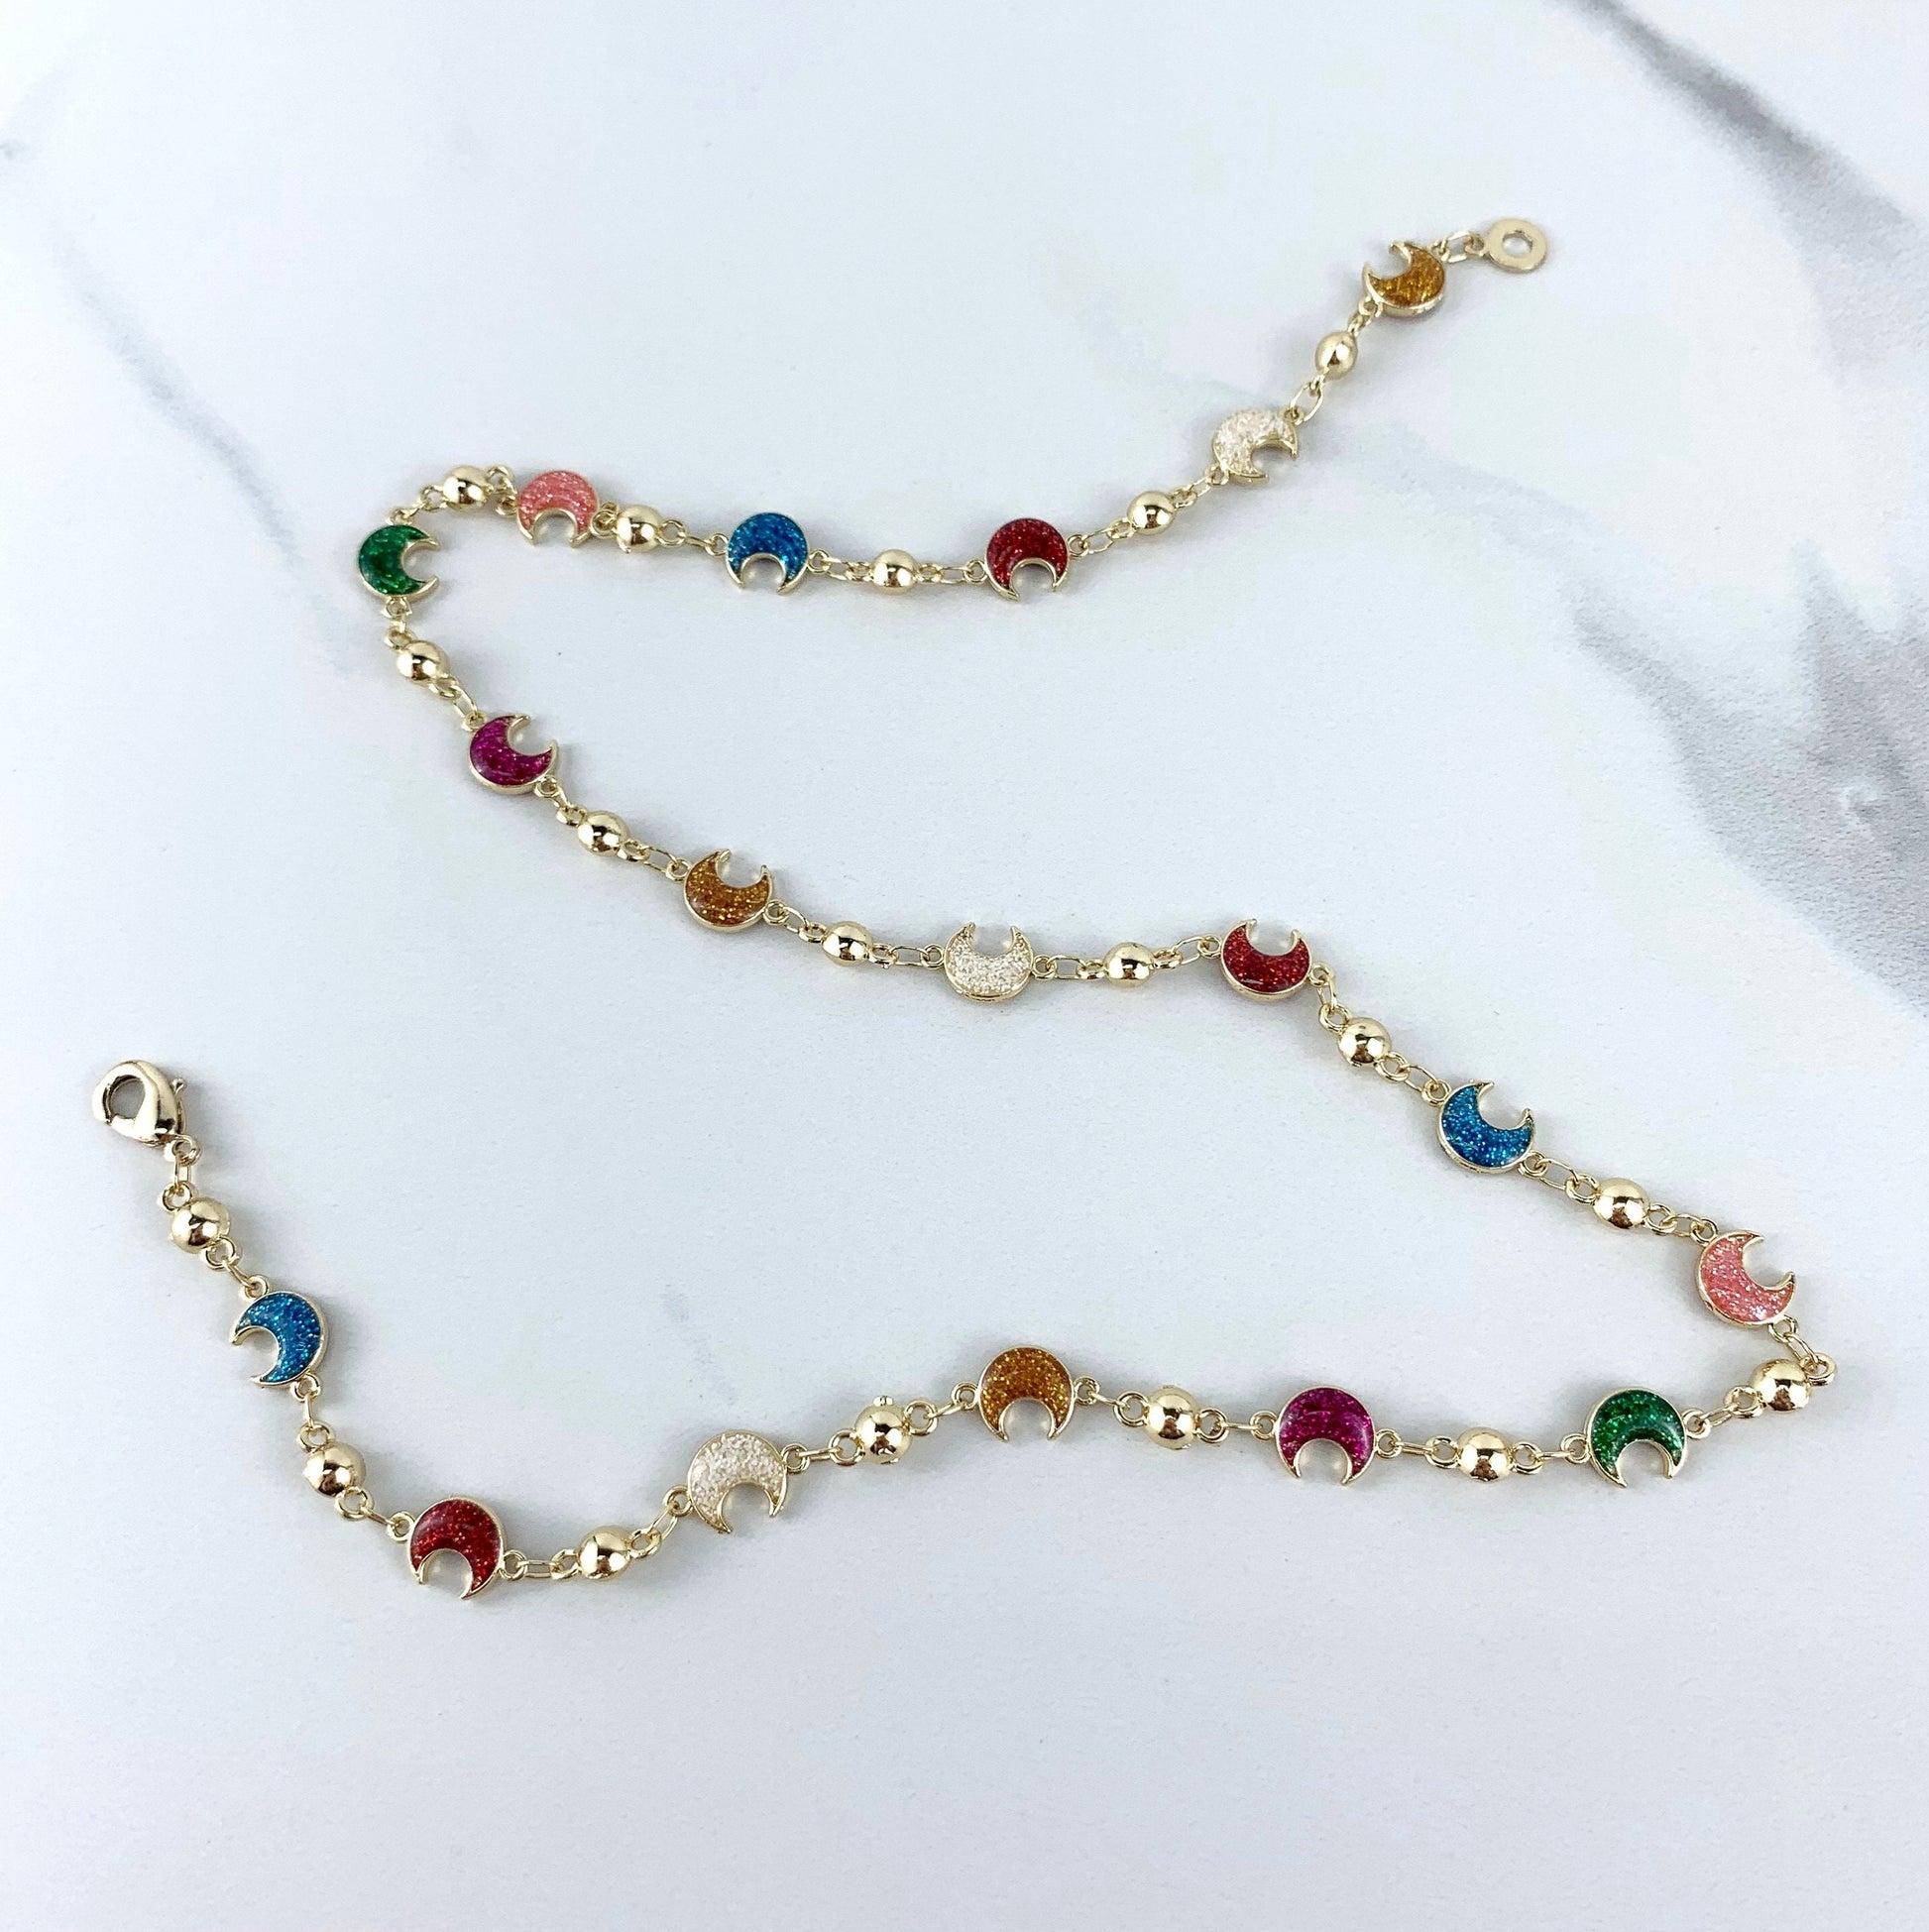 18k Gold Filled Bead Chain Featuring Colorful Sparkle Moon Simulated Druse Stones Necklace Wholesale Jewelry Supplies